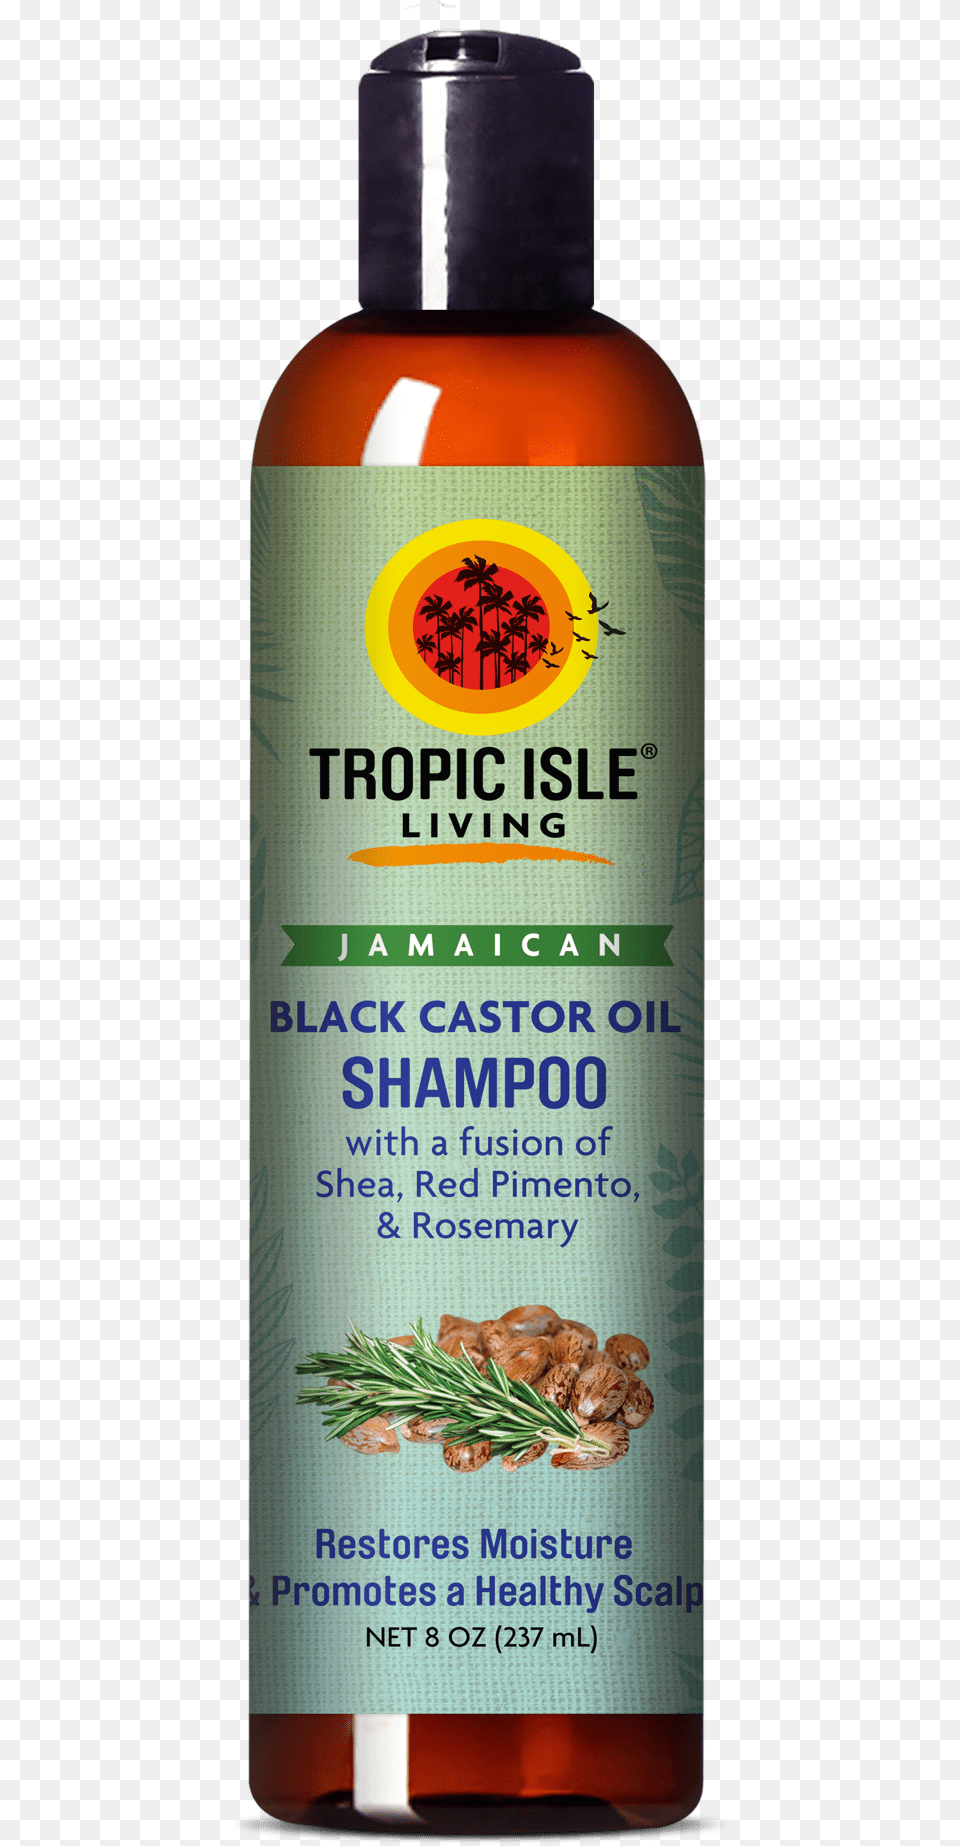 Jamaican Black Castor Oil Shampoo Tropic Isle Leave In Conditioner And Detangler, Bottle, Herbal, Herbs, Lotion Png